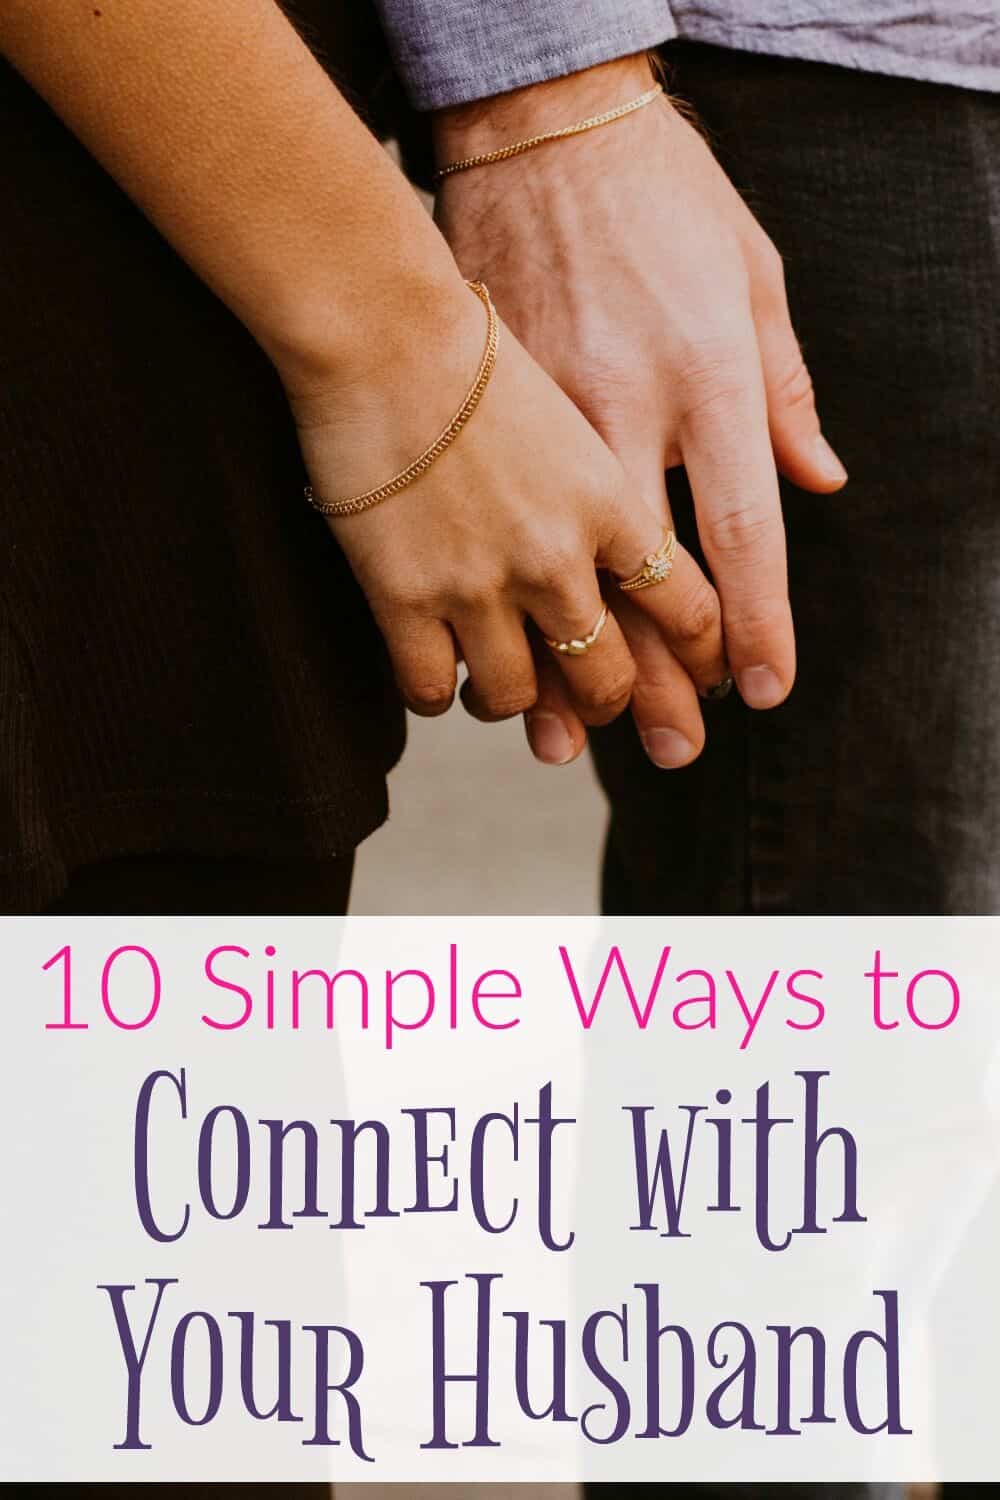 Our marriages are so important, and yet so often neglected. If you feel like you need to get closer to your husband, then try these simple ways to connect with your husband today.